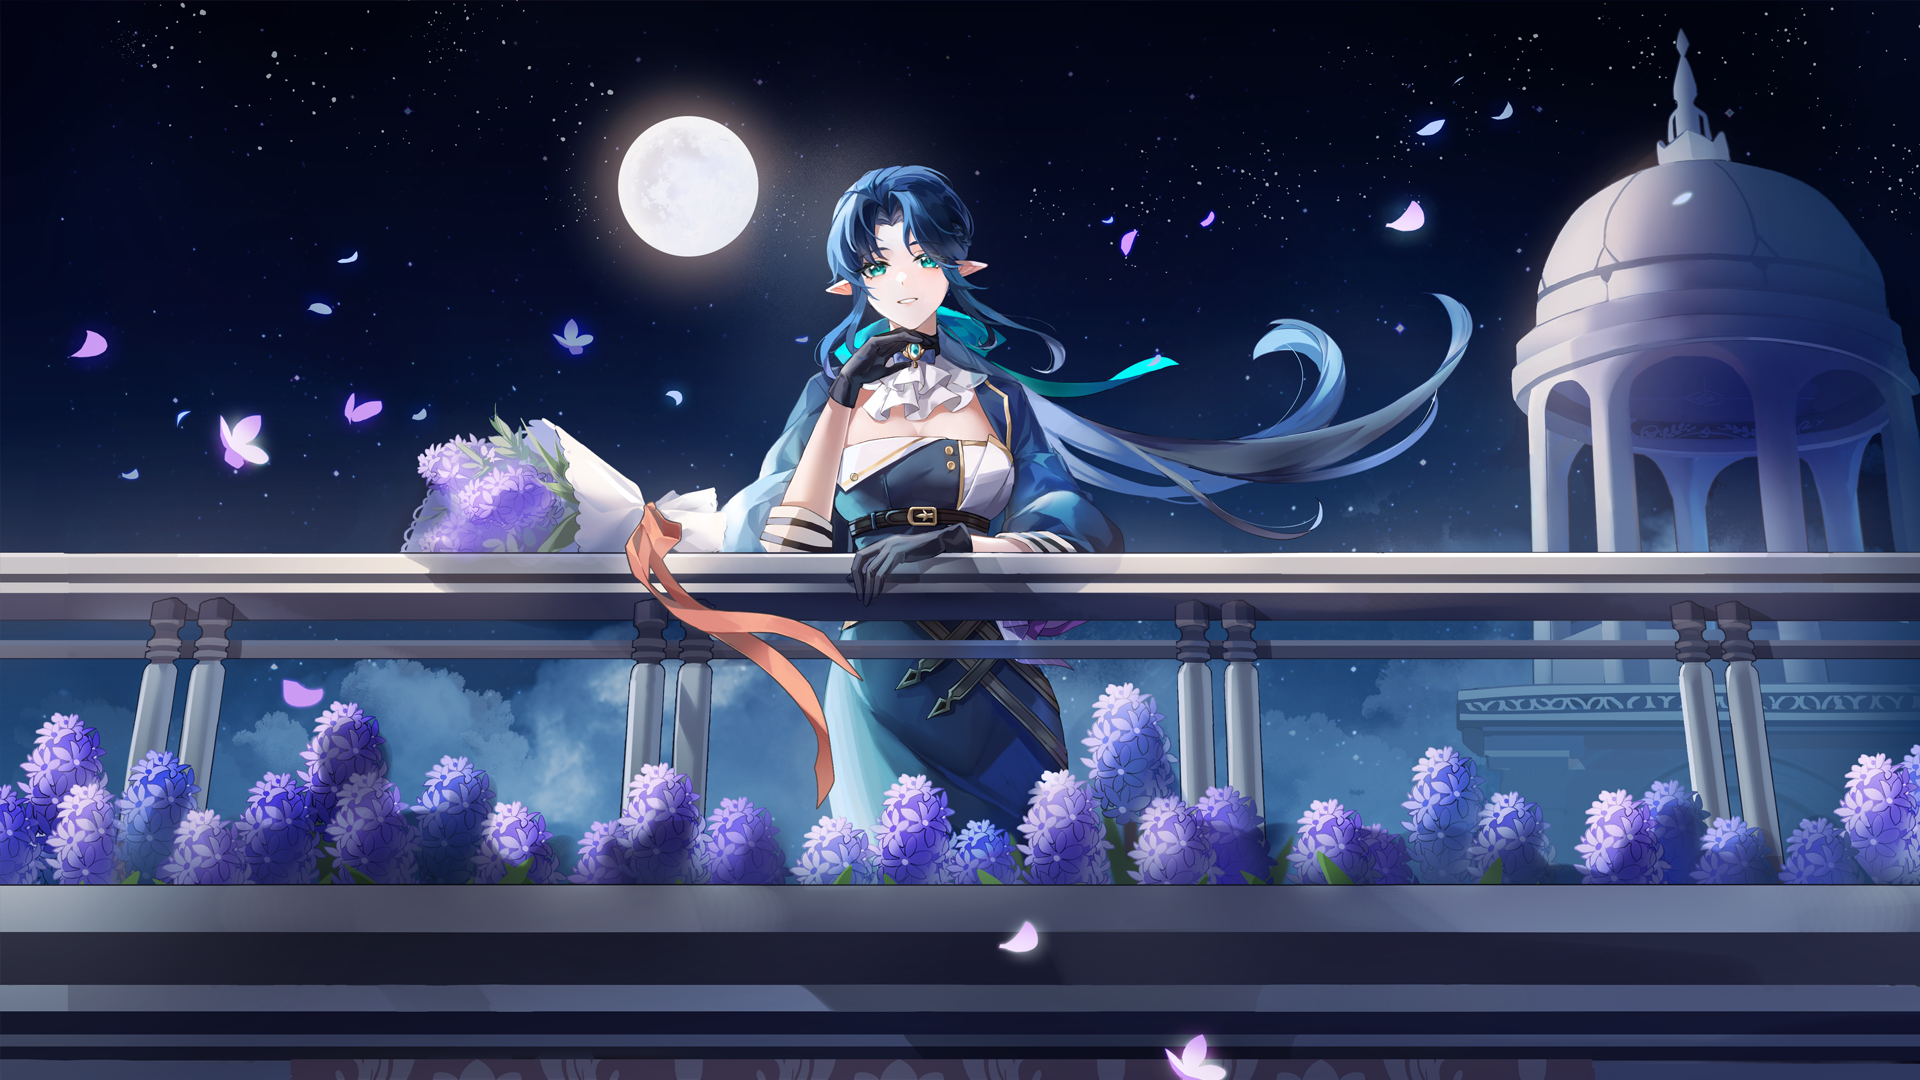 Women Night Hair Blowing In The Wind Game Characters 1920x1080